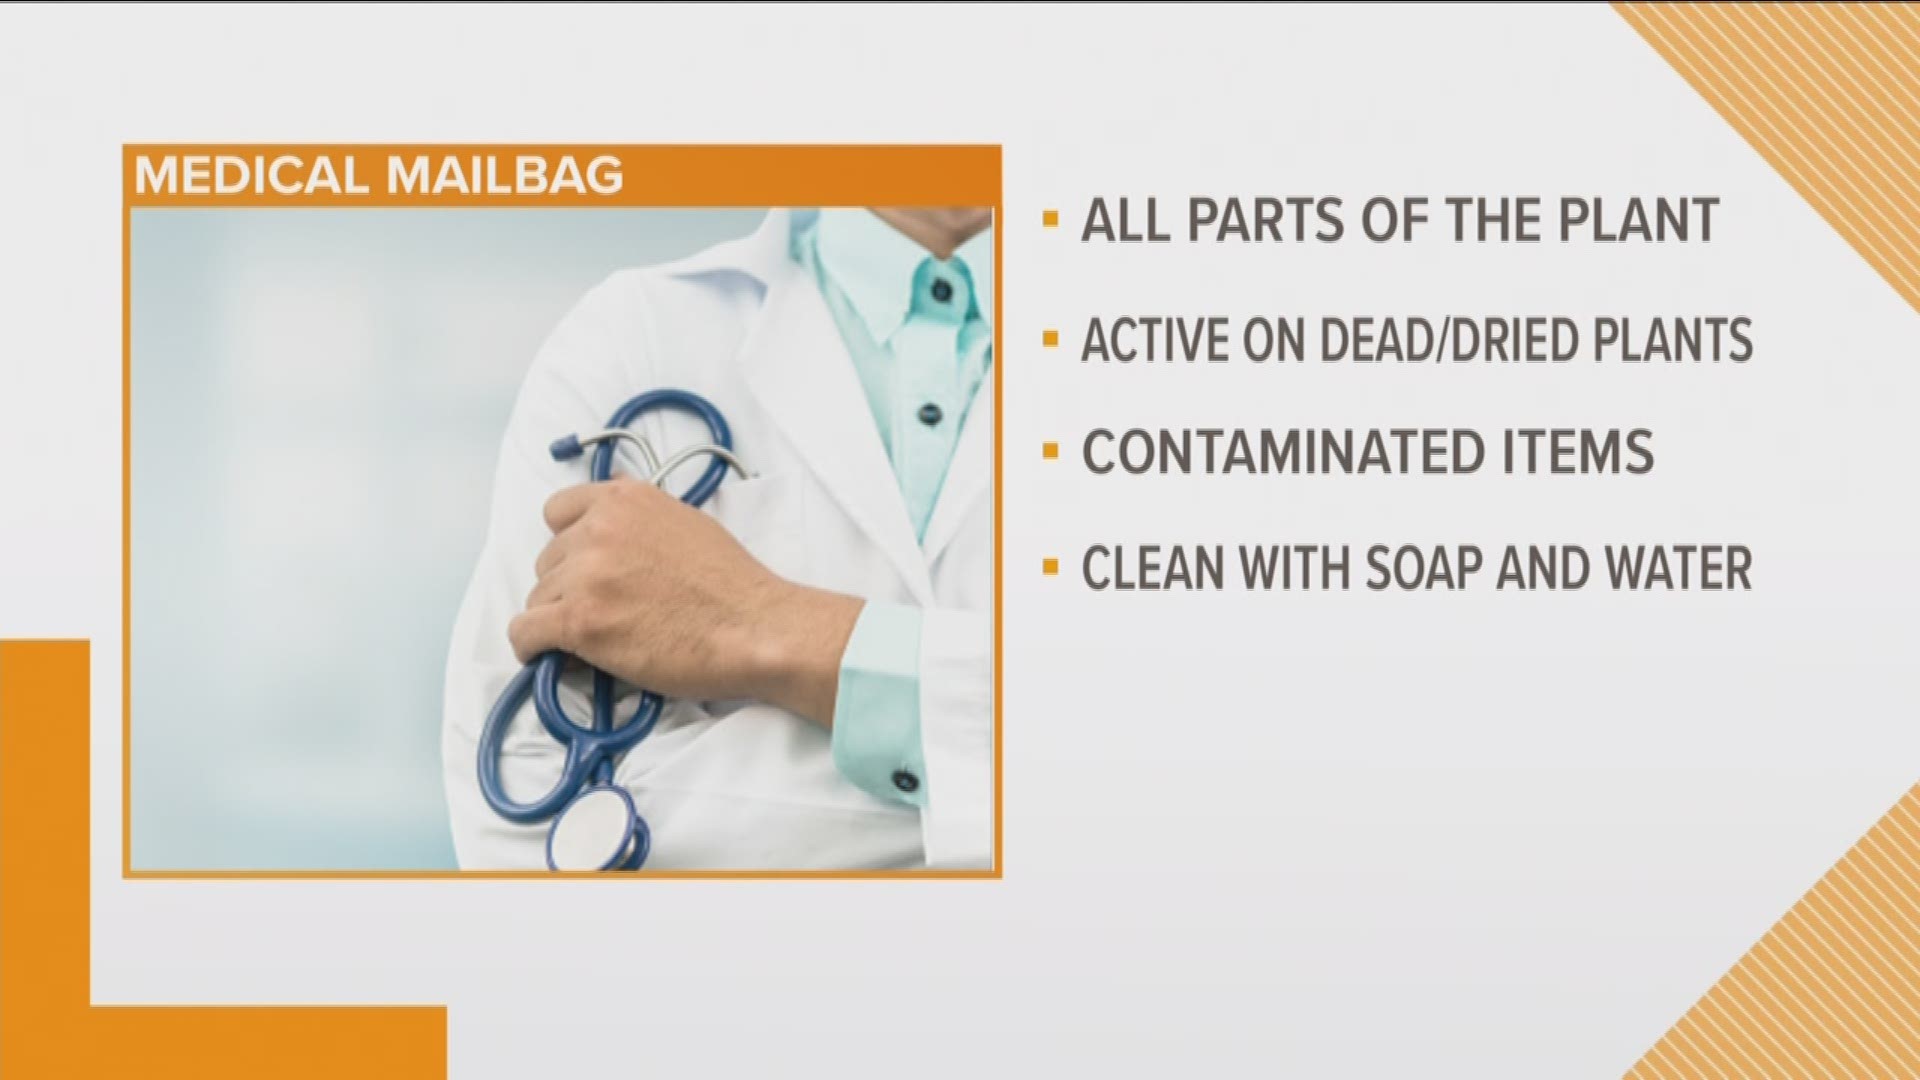 It's Medical Monday here at THV11 and Dr. T Glen Pait is here with his medical mailbag.